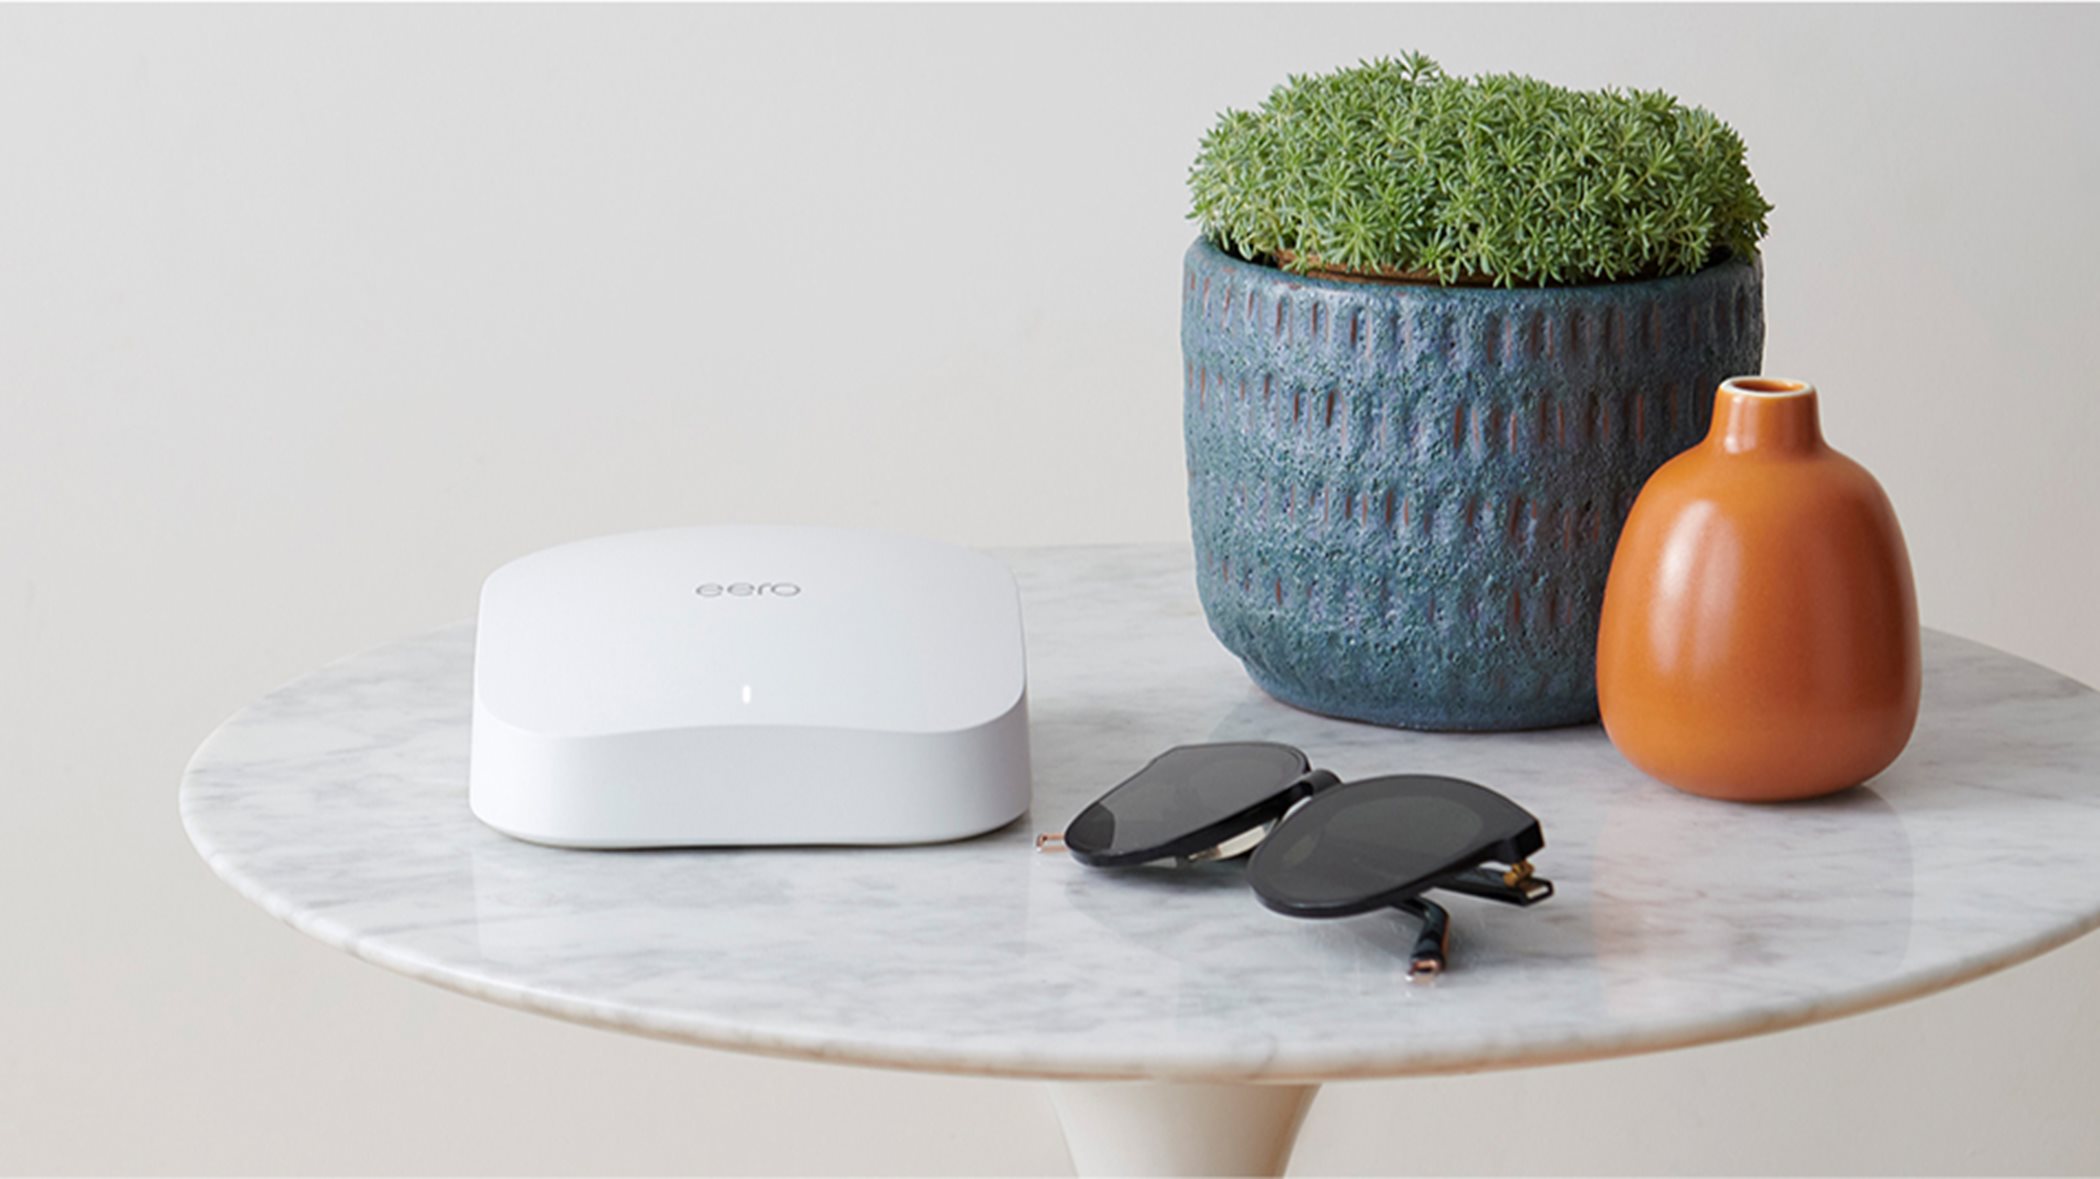 Eero system on a table with plant 